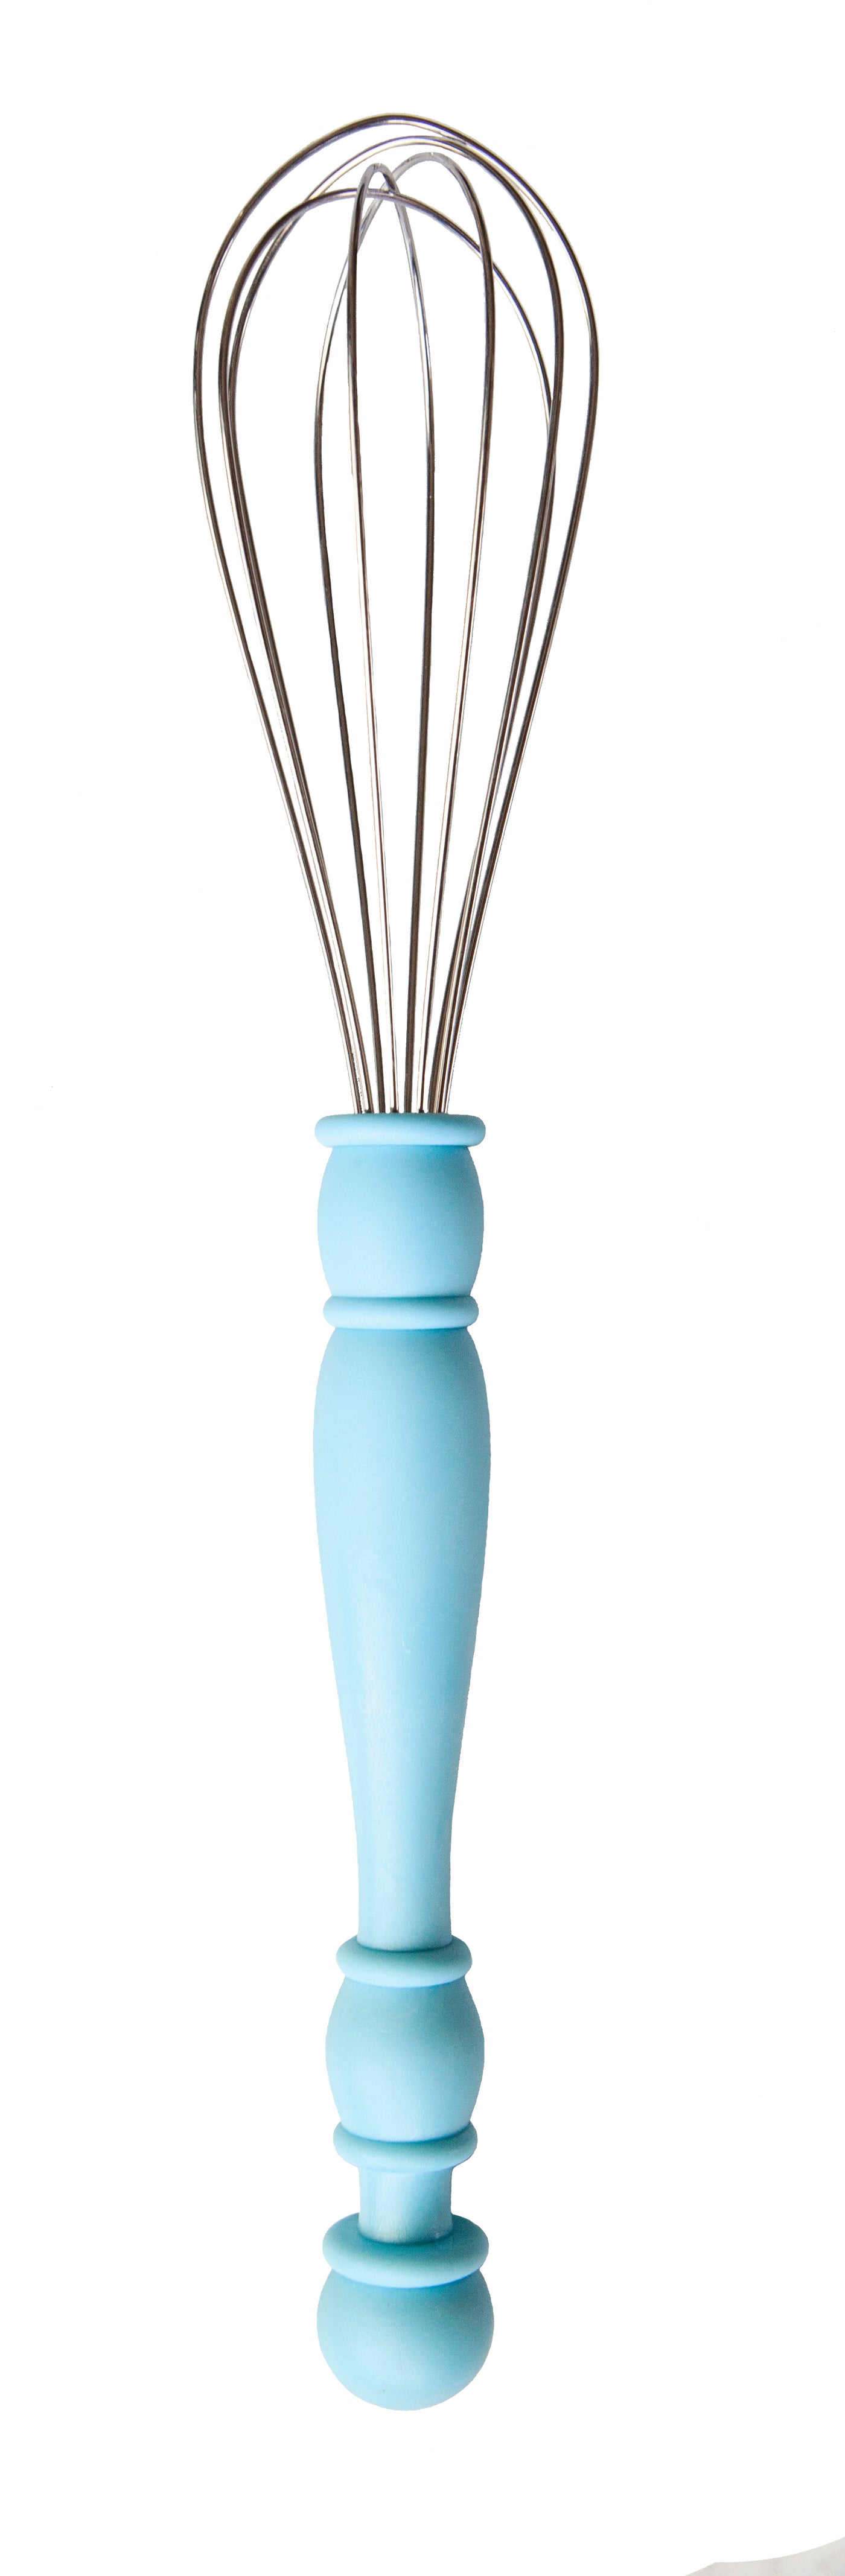 Quirky Bloom - Retractable Whisk  Retractable, Whisk, Balloon whisk